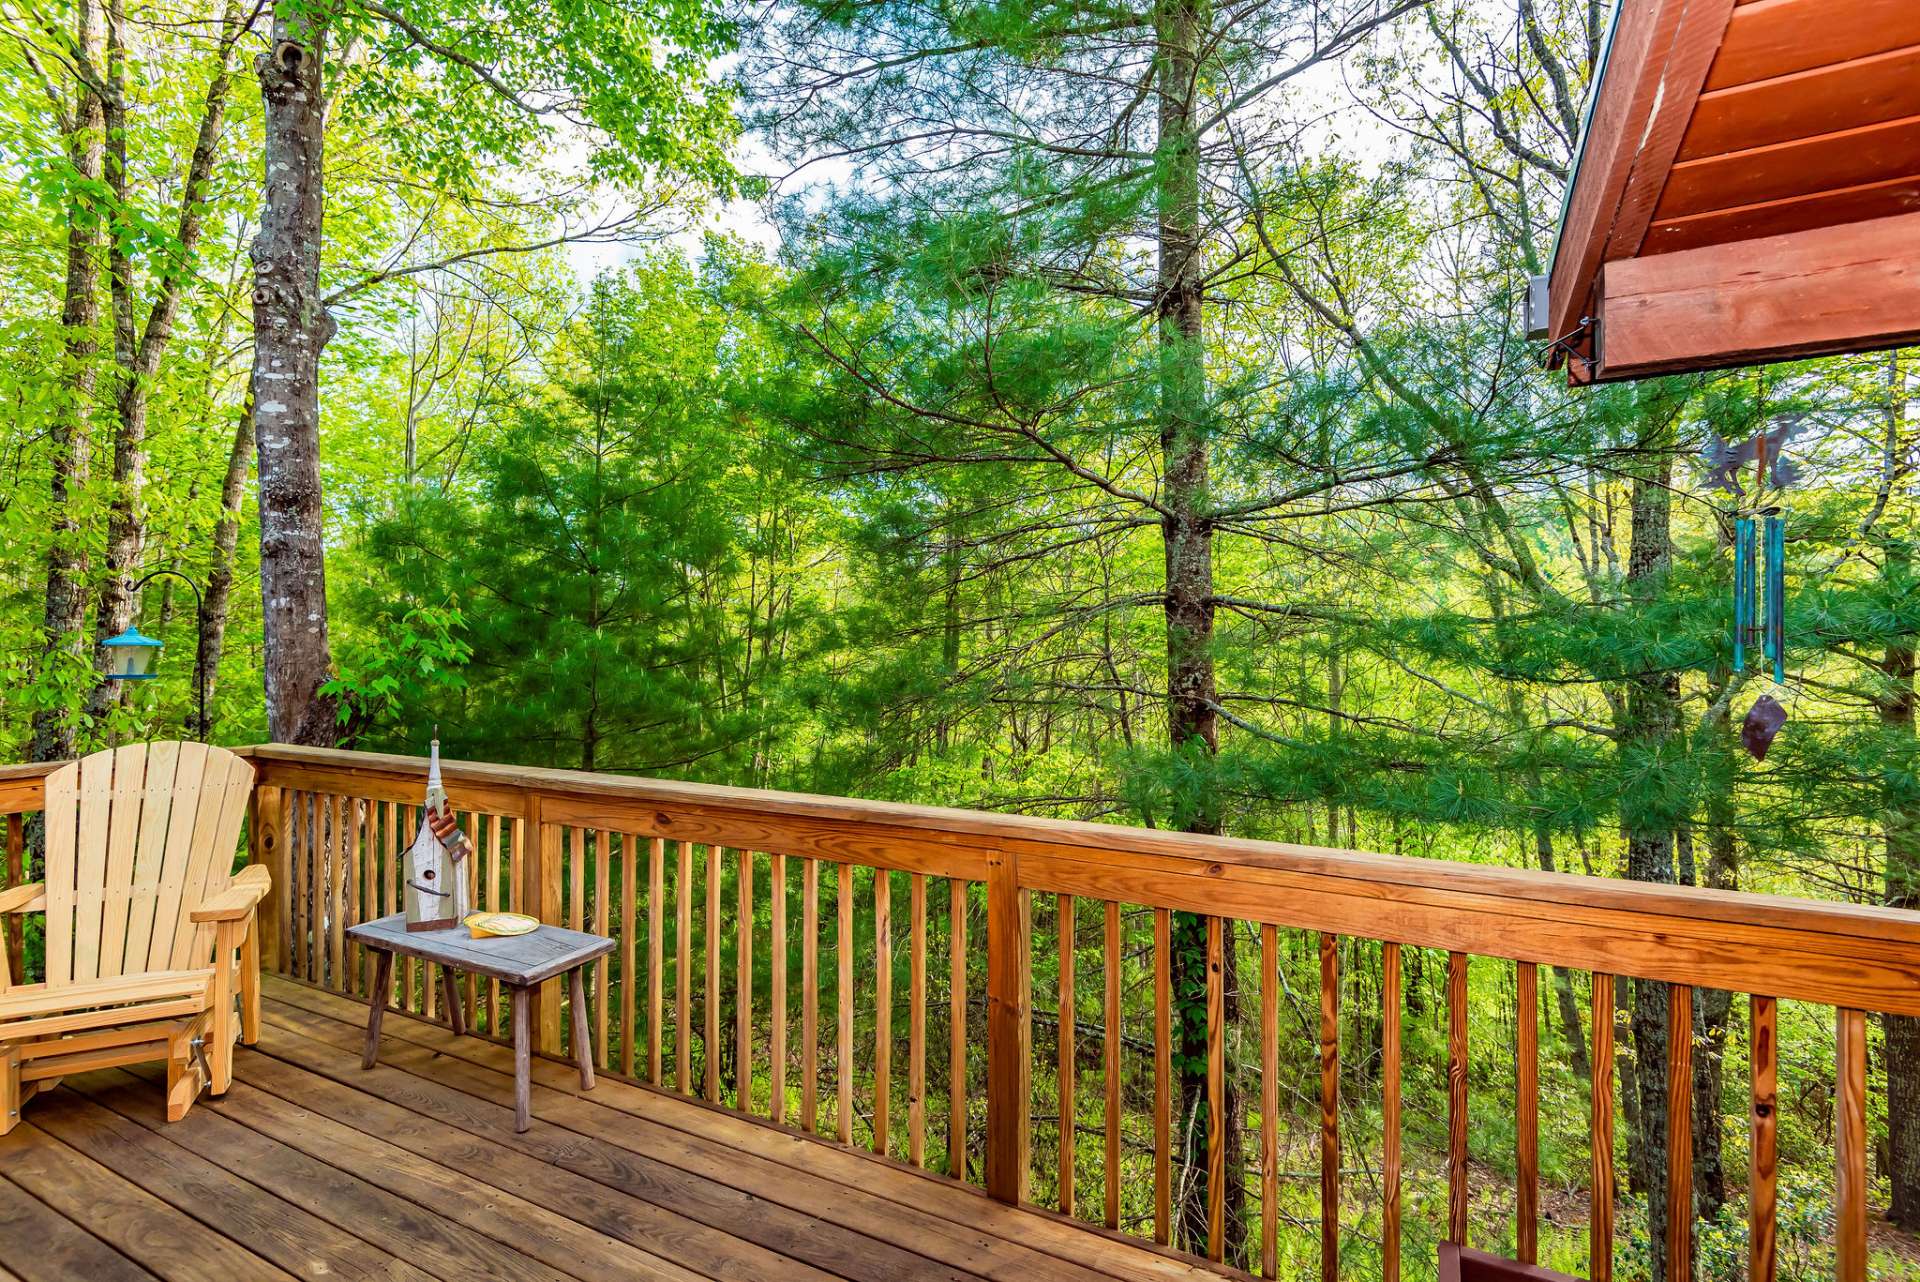 Enjoy relaxing on the deck or porch with the beauty of the woodlands all around you.